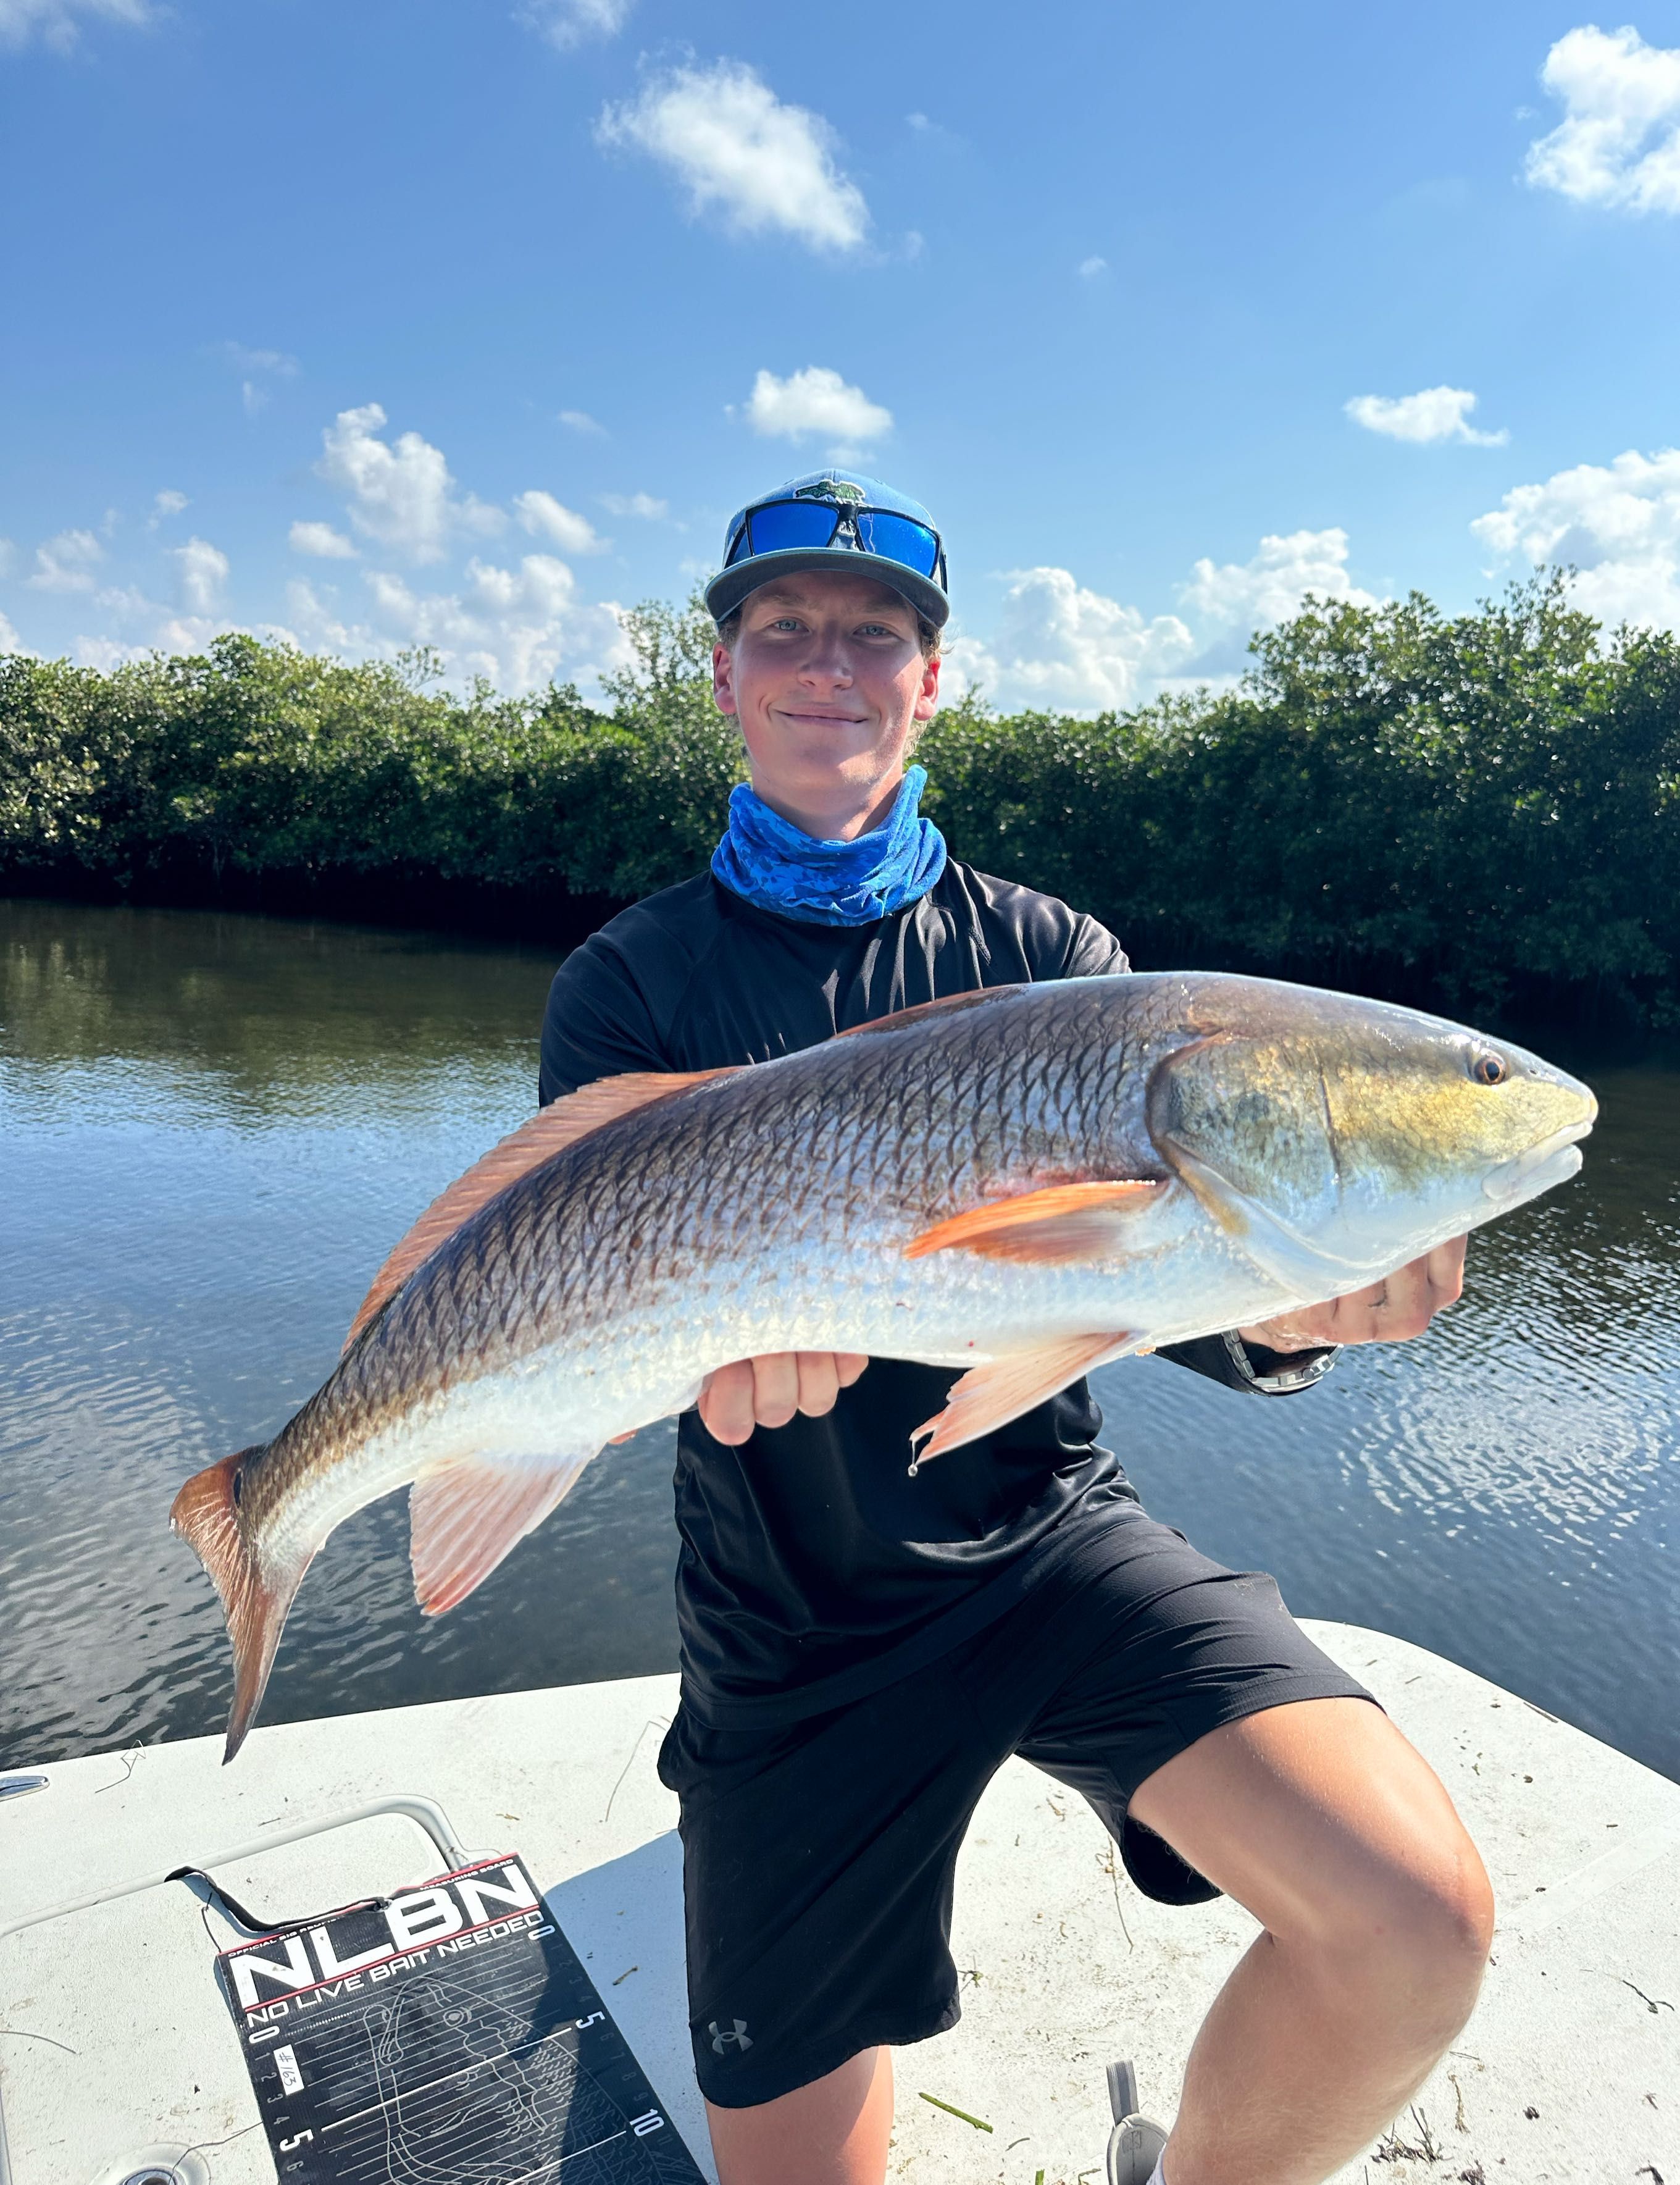 Get Reel Outdoors Crystal River Fishing Charter | Private 4 Hour Charter Trip fishing Inshore